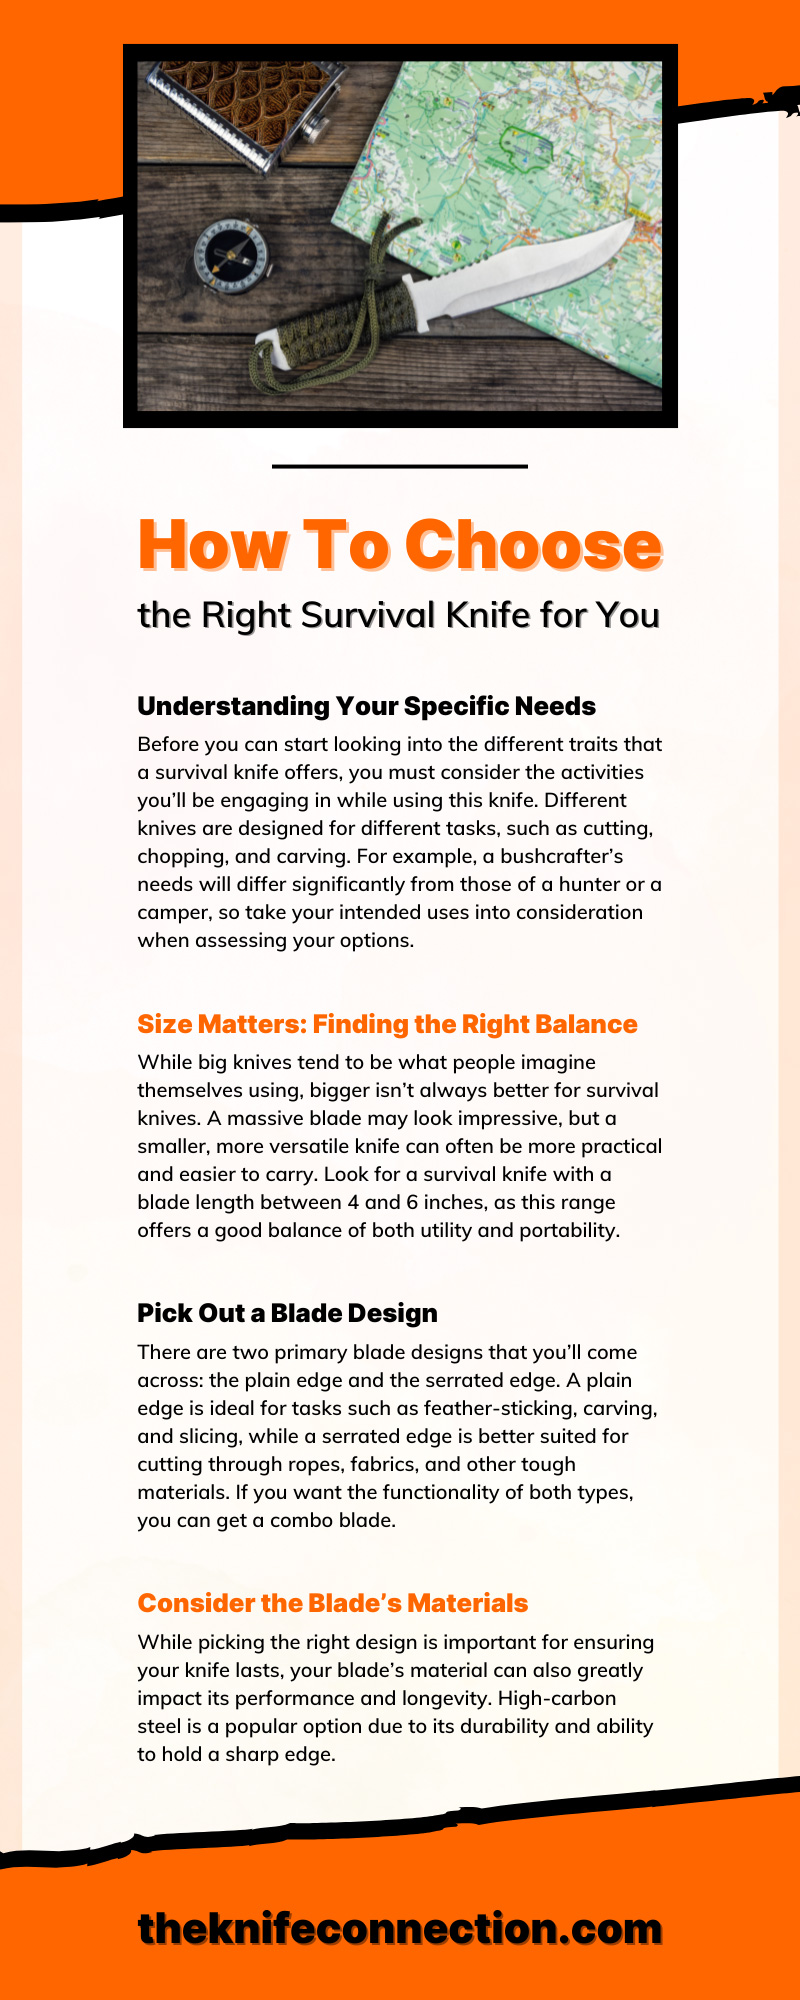 How To Choose the Right Survival Knife for You